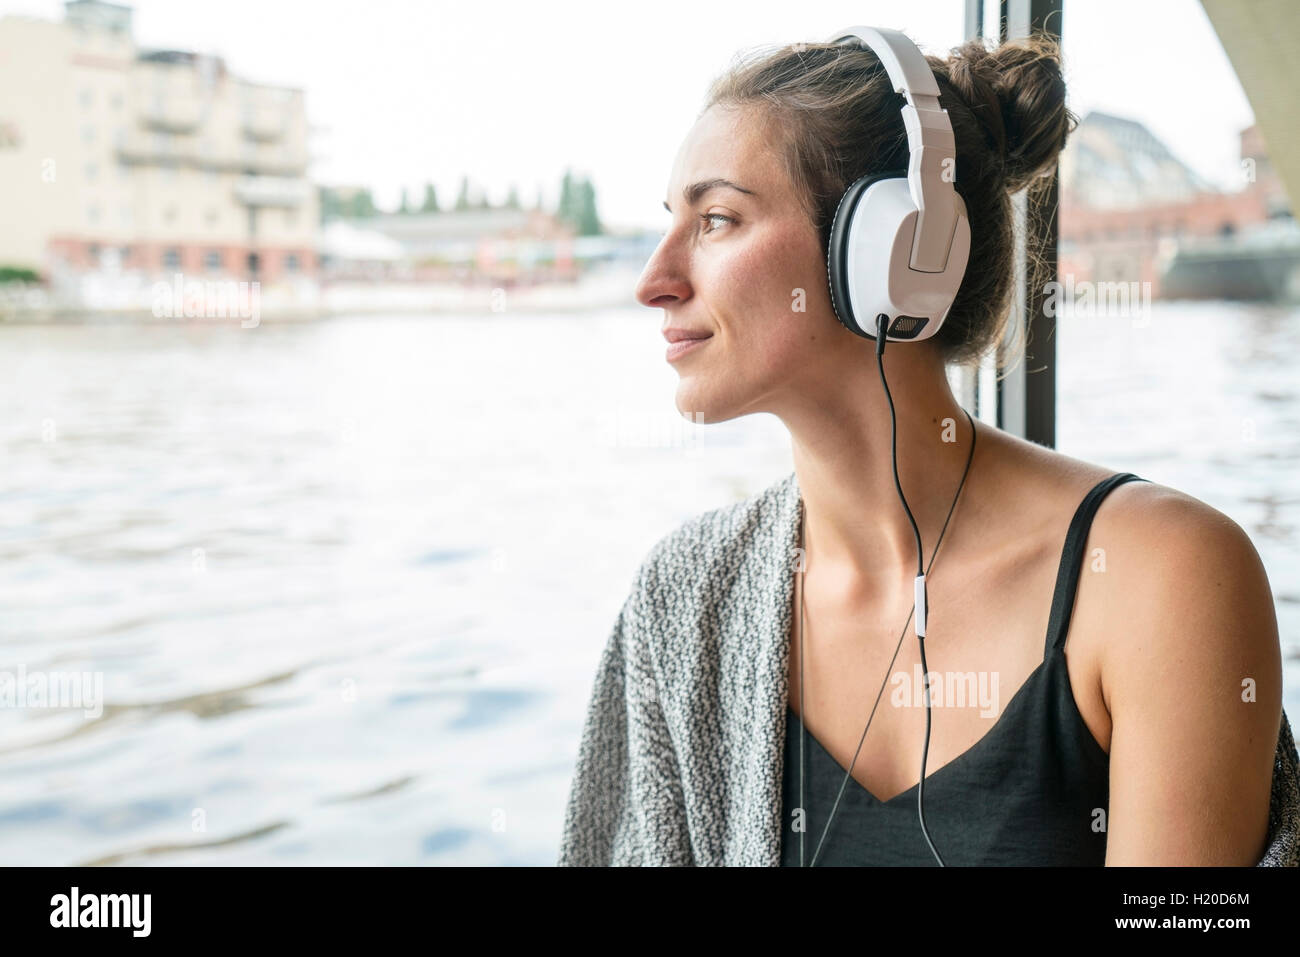 Relaxed woman listening music with headphones Banque D'Images